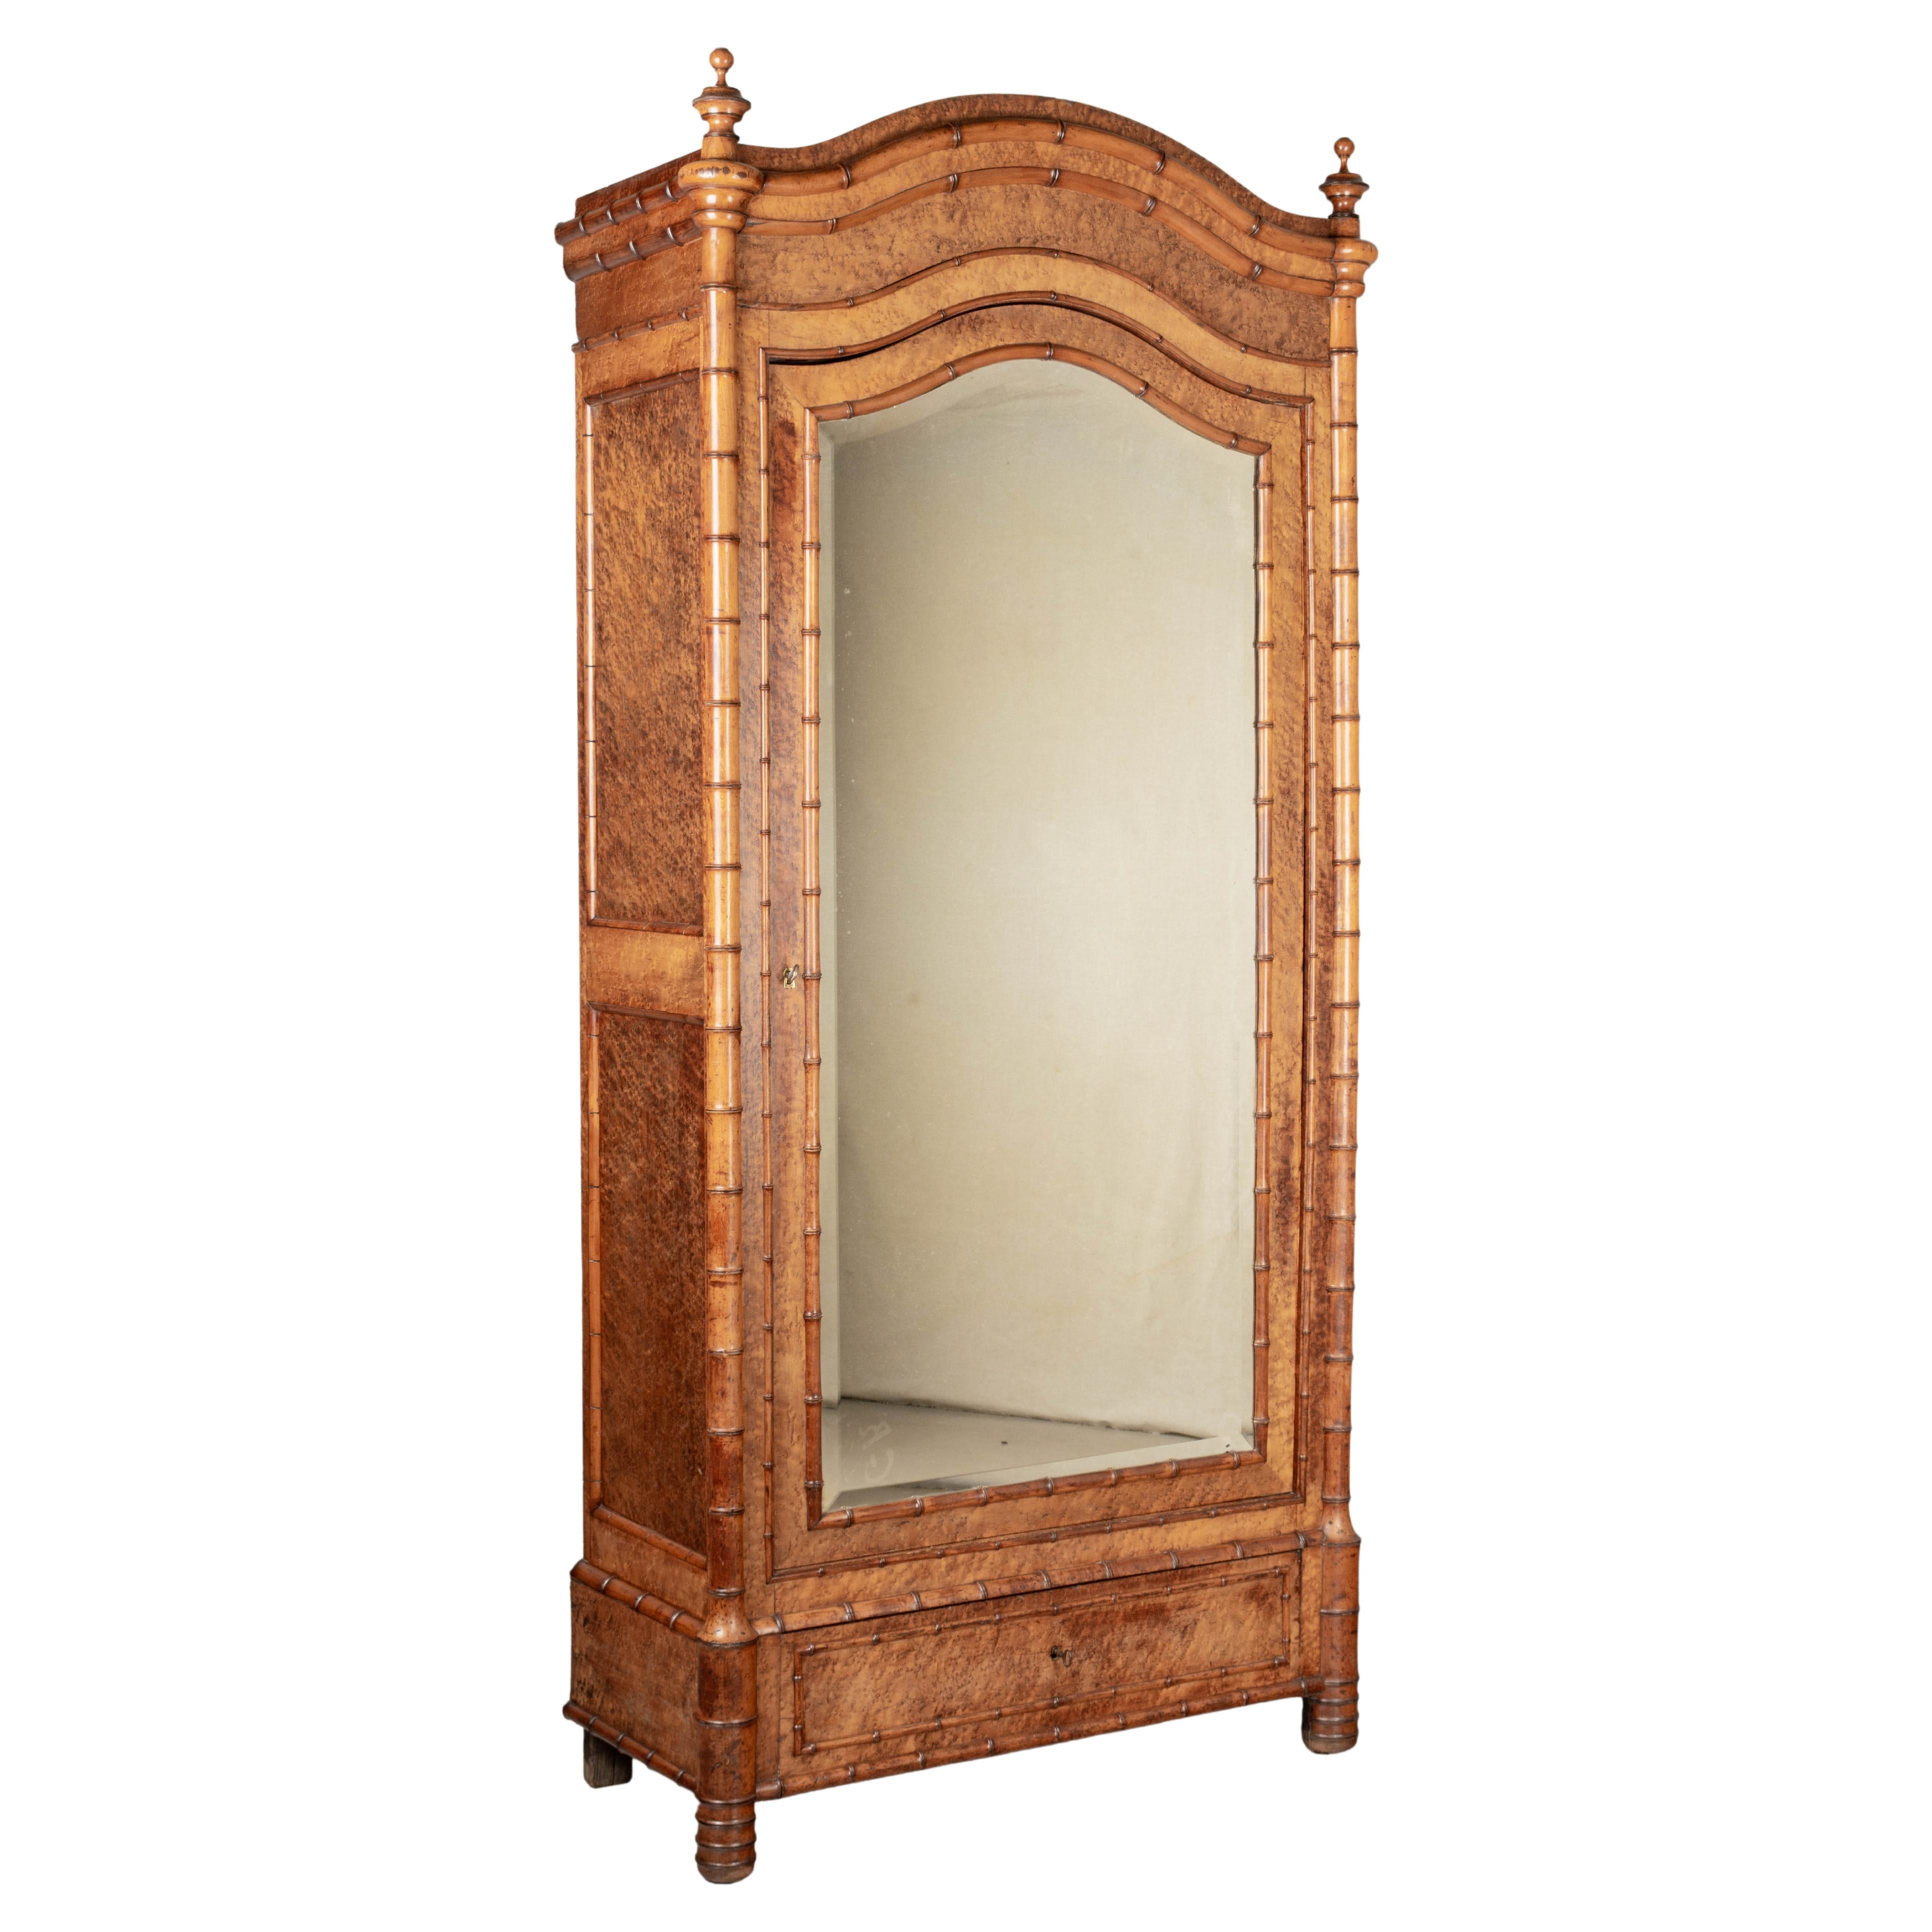 19th Century French Faux Bamboo Armoire or Wardrobe